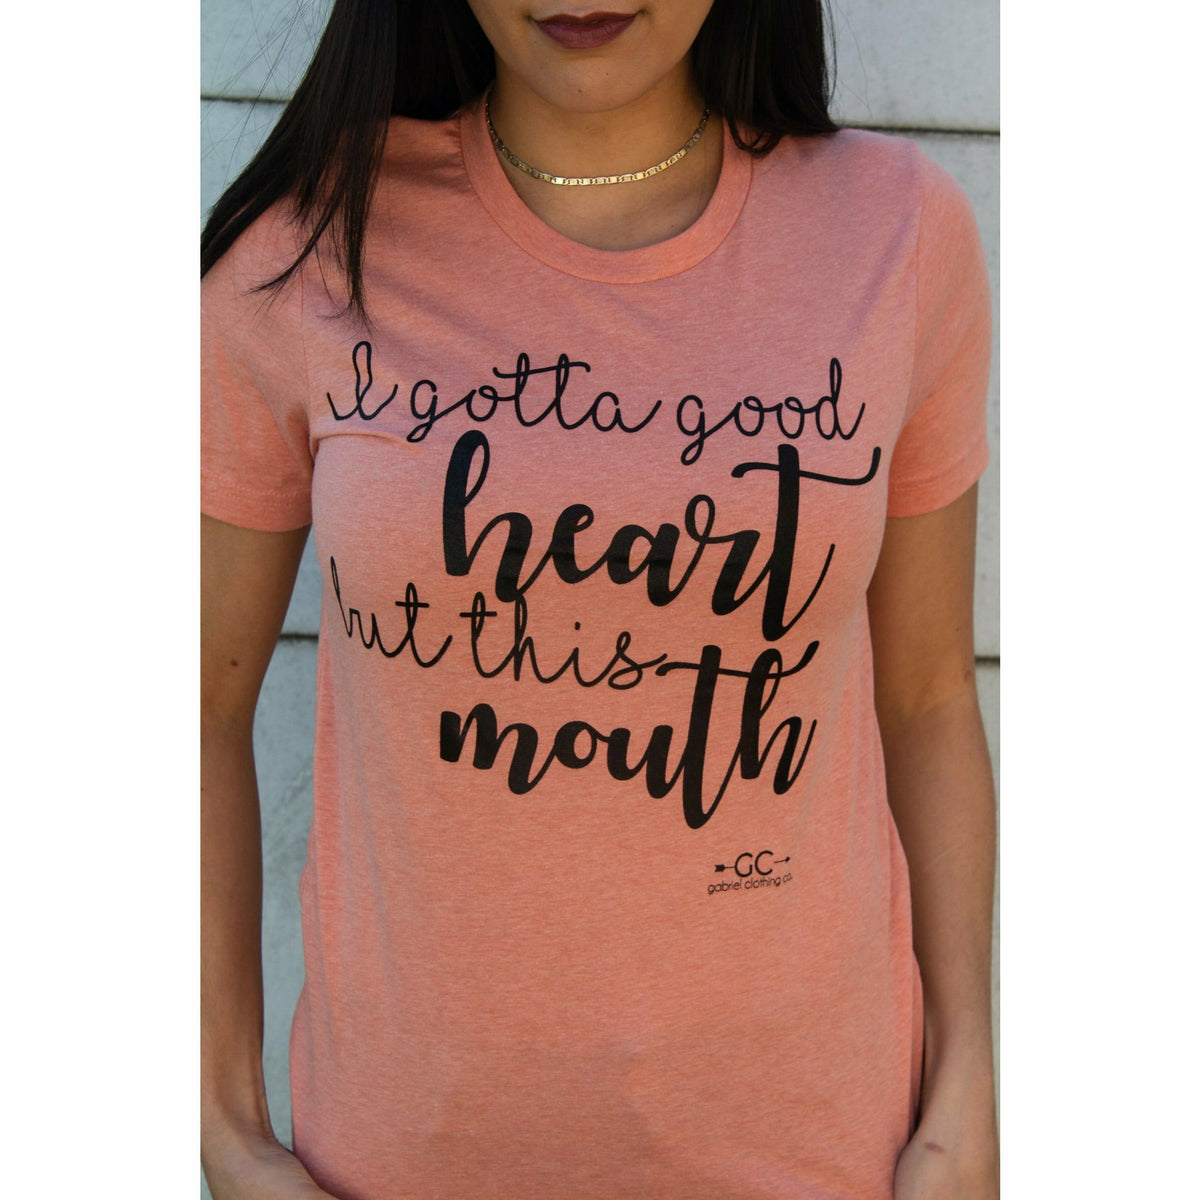 Good heart but this mouth tee or sweatshirt